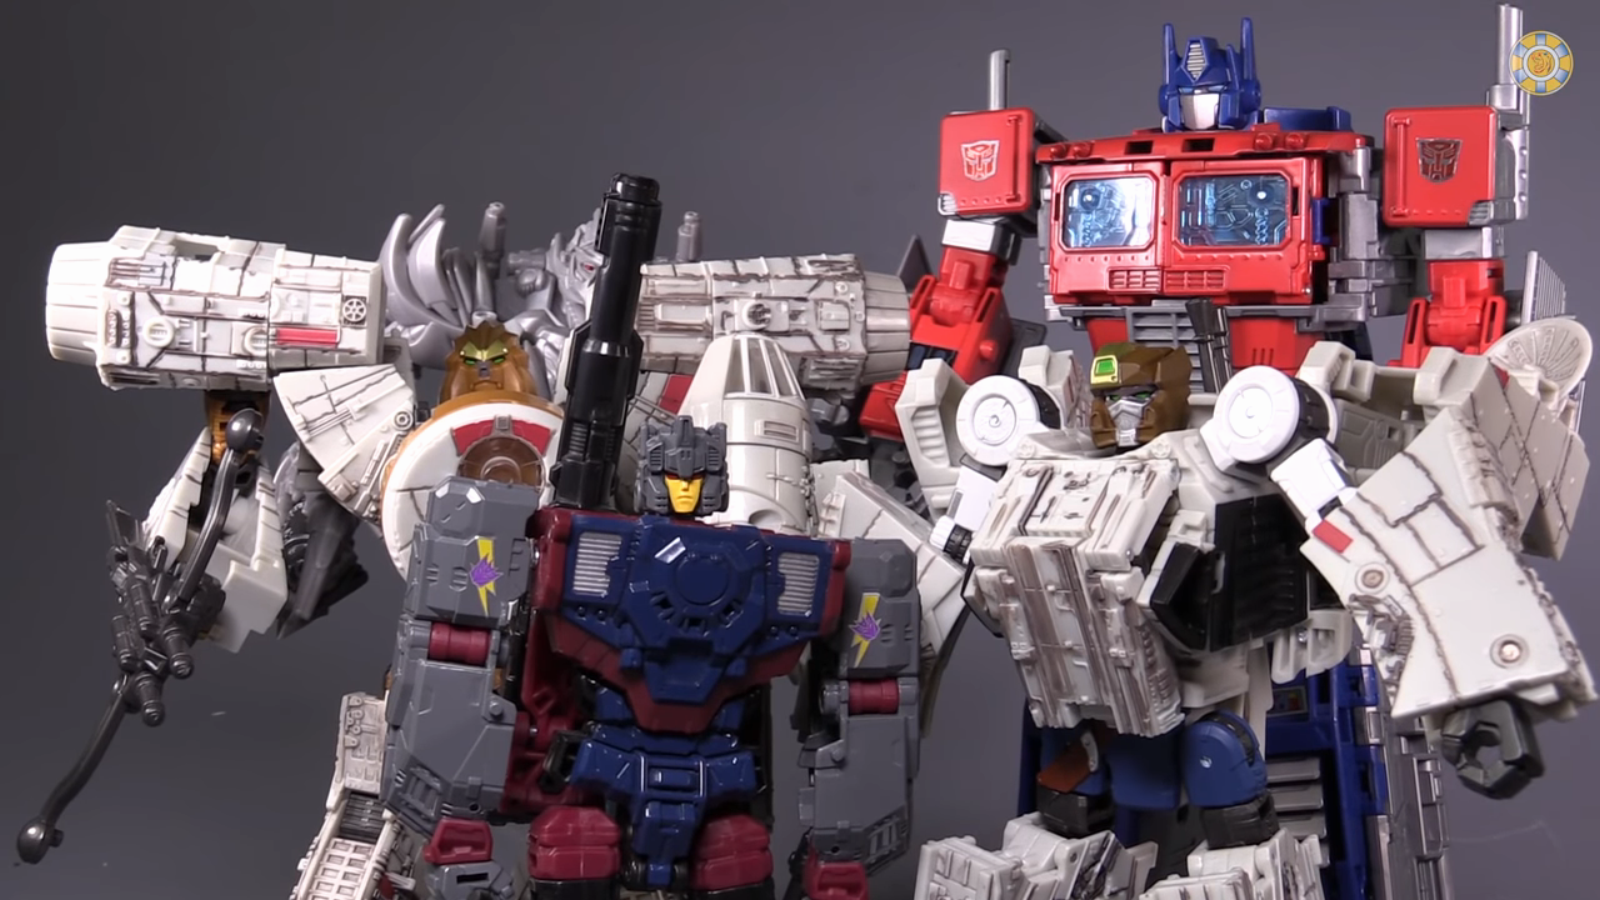 Video Review of Takara Tomy Star Wars Powered By Transformers